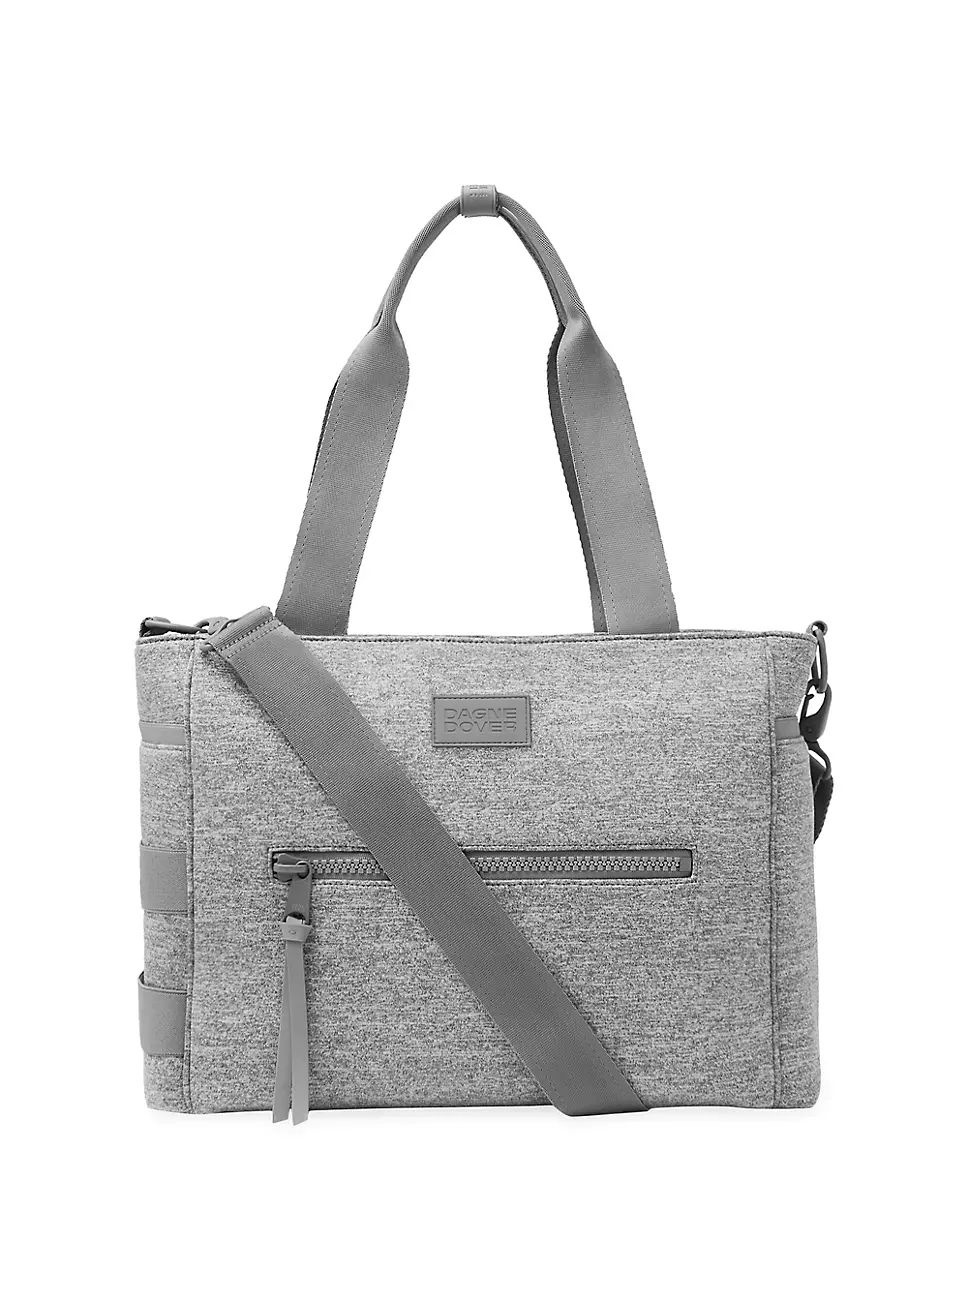 Dagne Dover Large Wade Diaper Tote | Saks Fifth Avenue